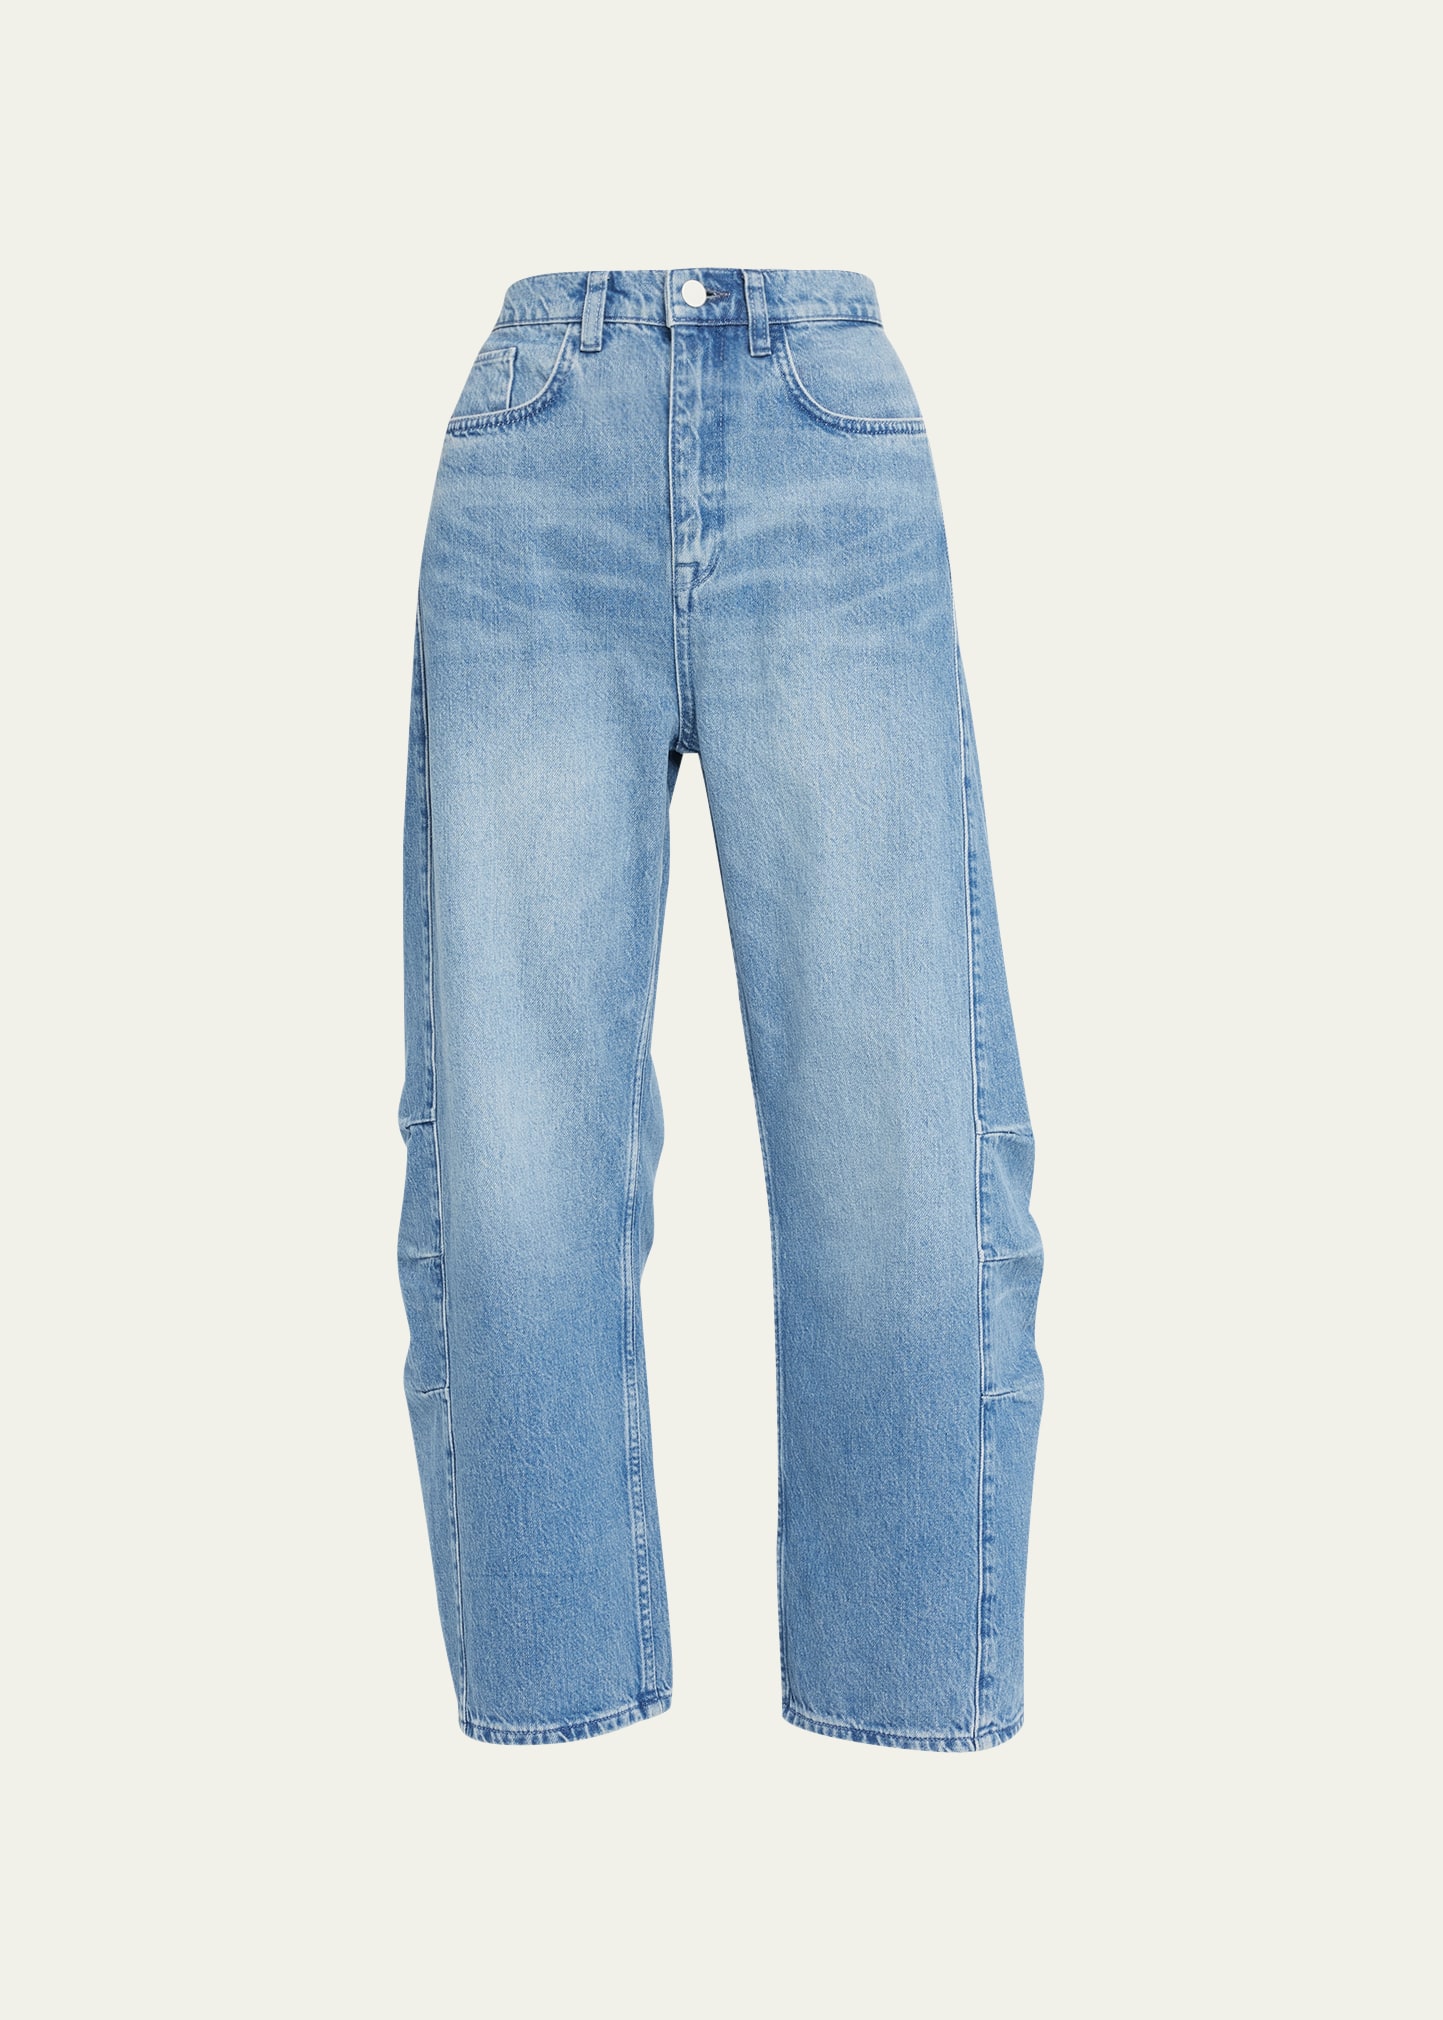 Ms.Walker Mid-Rise Constructed Jeans